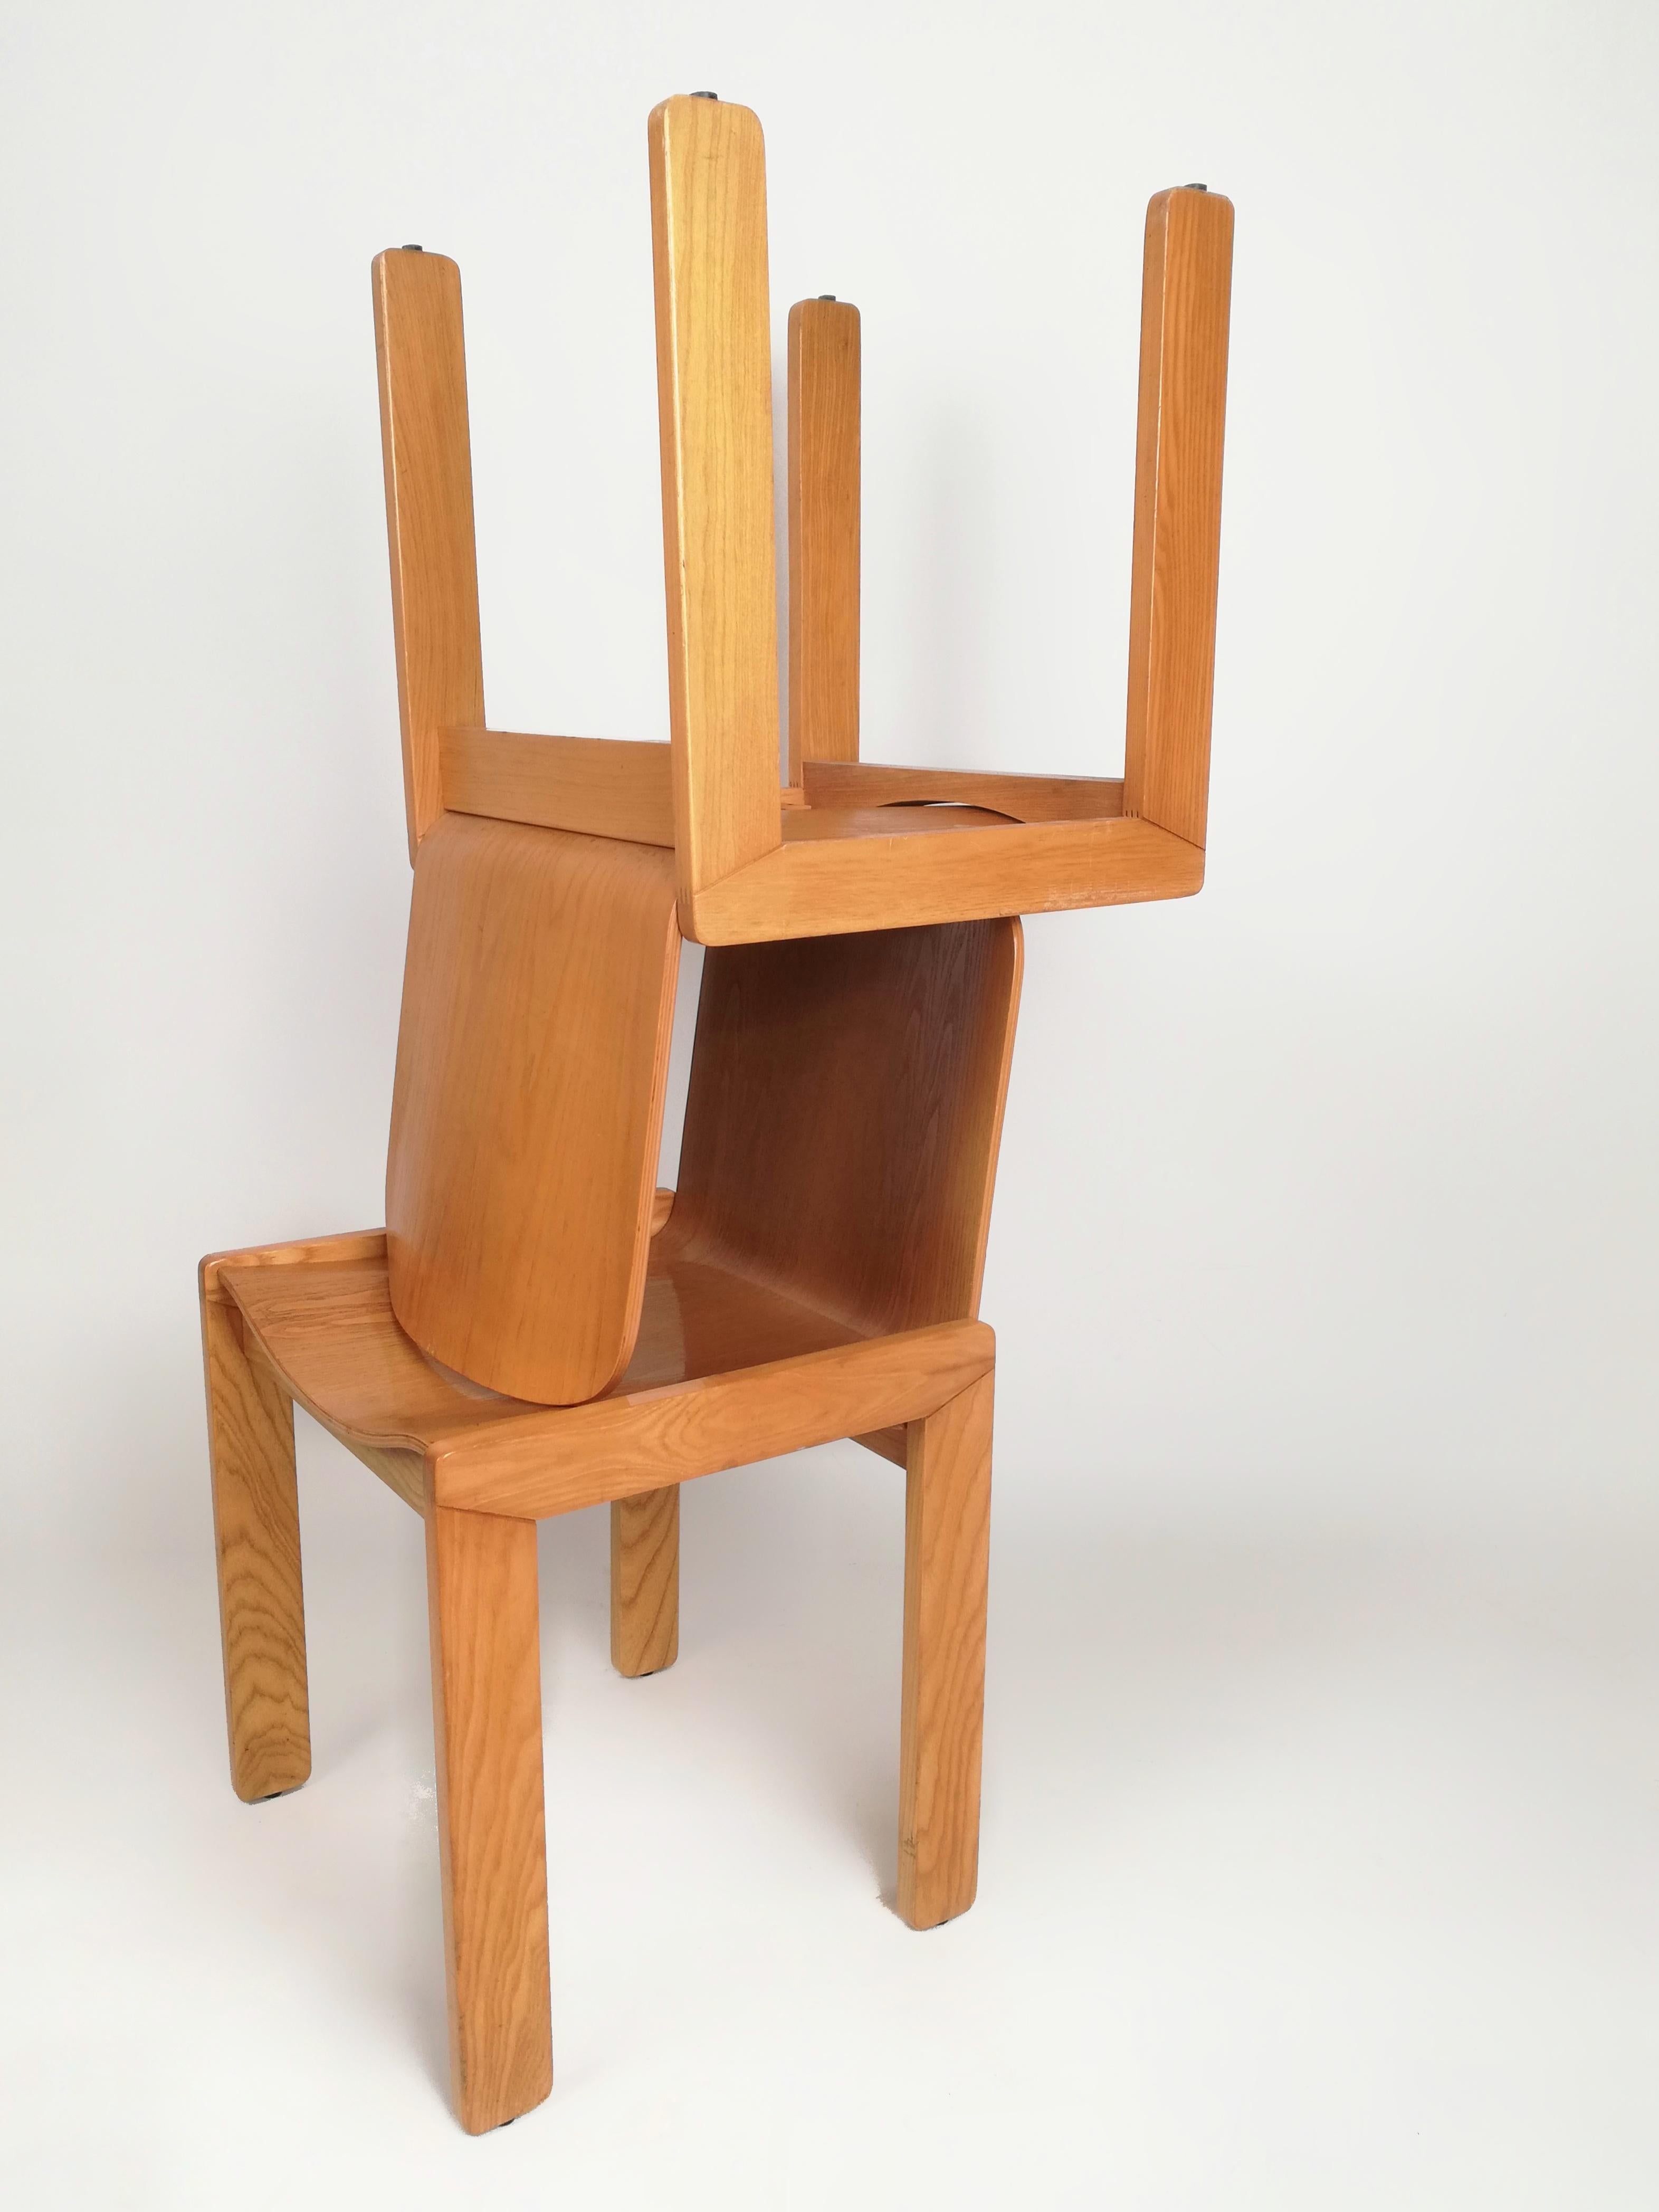 6 Curved Plywood Dining Chairs by Molteni in the style of Scarpa, Italy, 1970s For Sale 3